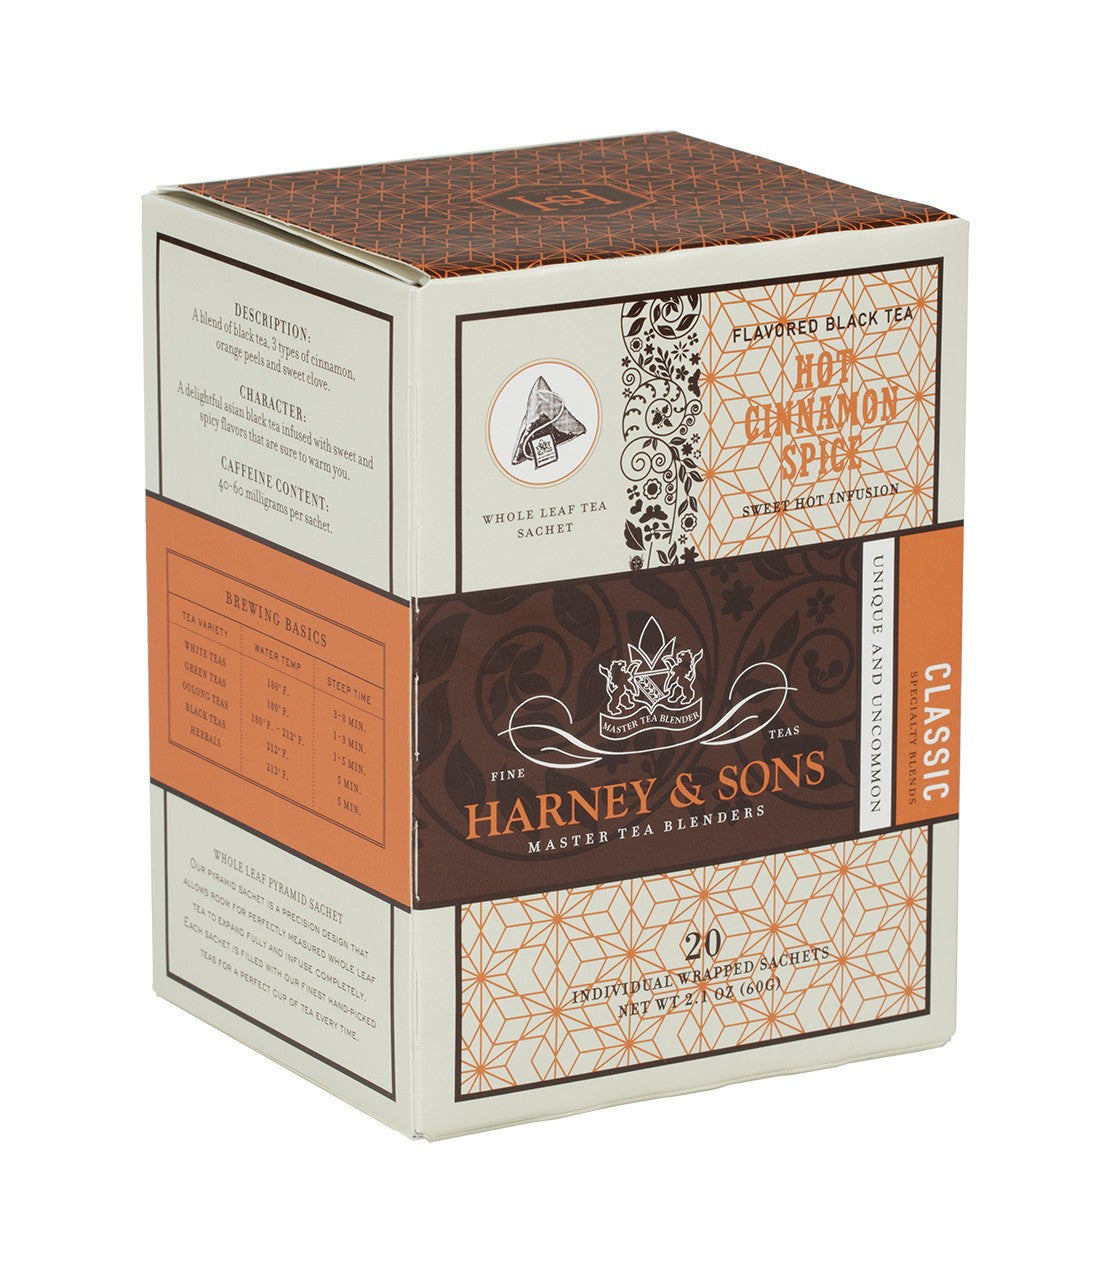 Hot Cinnamon Spice, Box of 20 Individually Wrapped Sachets - Sachets Box of 20 Individually Wrapped Sachets - Harney & Sons Fine Teas